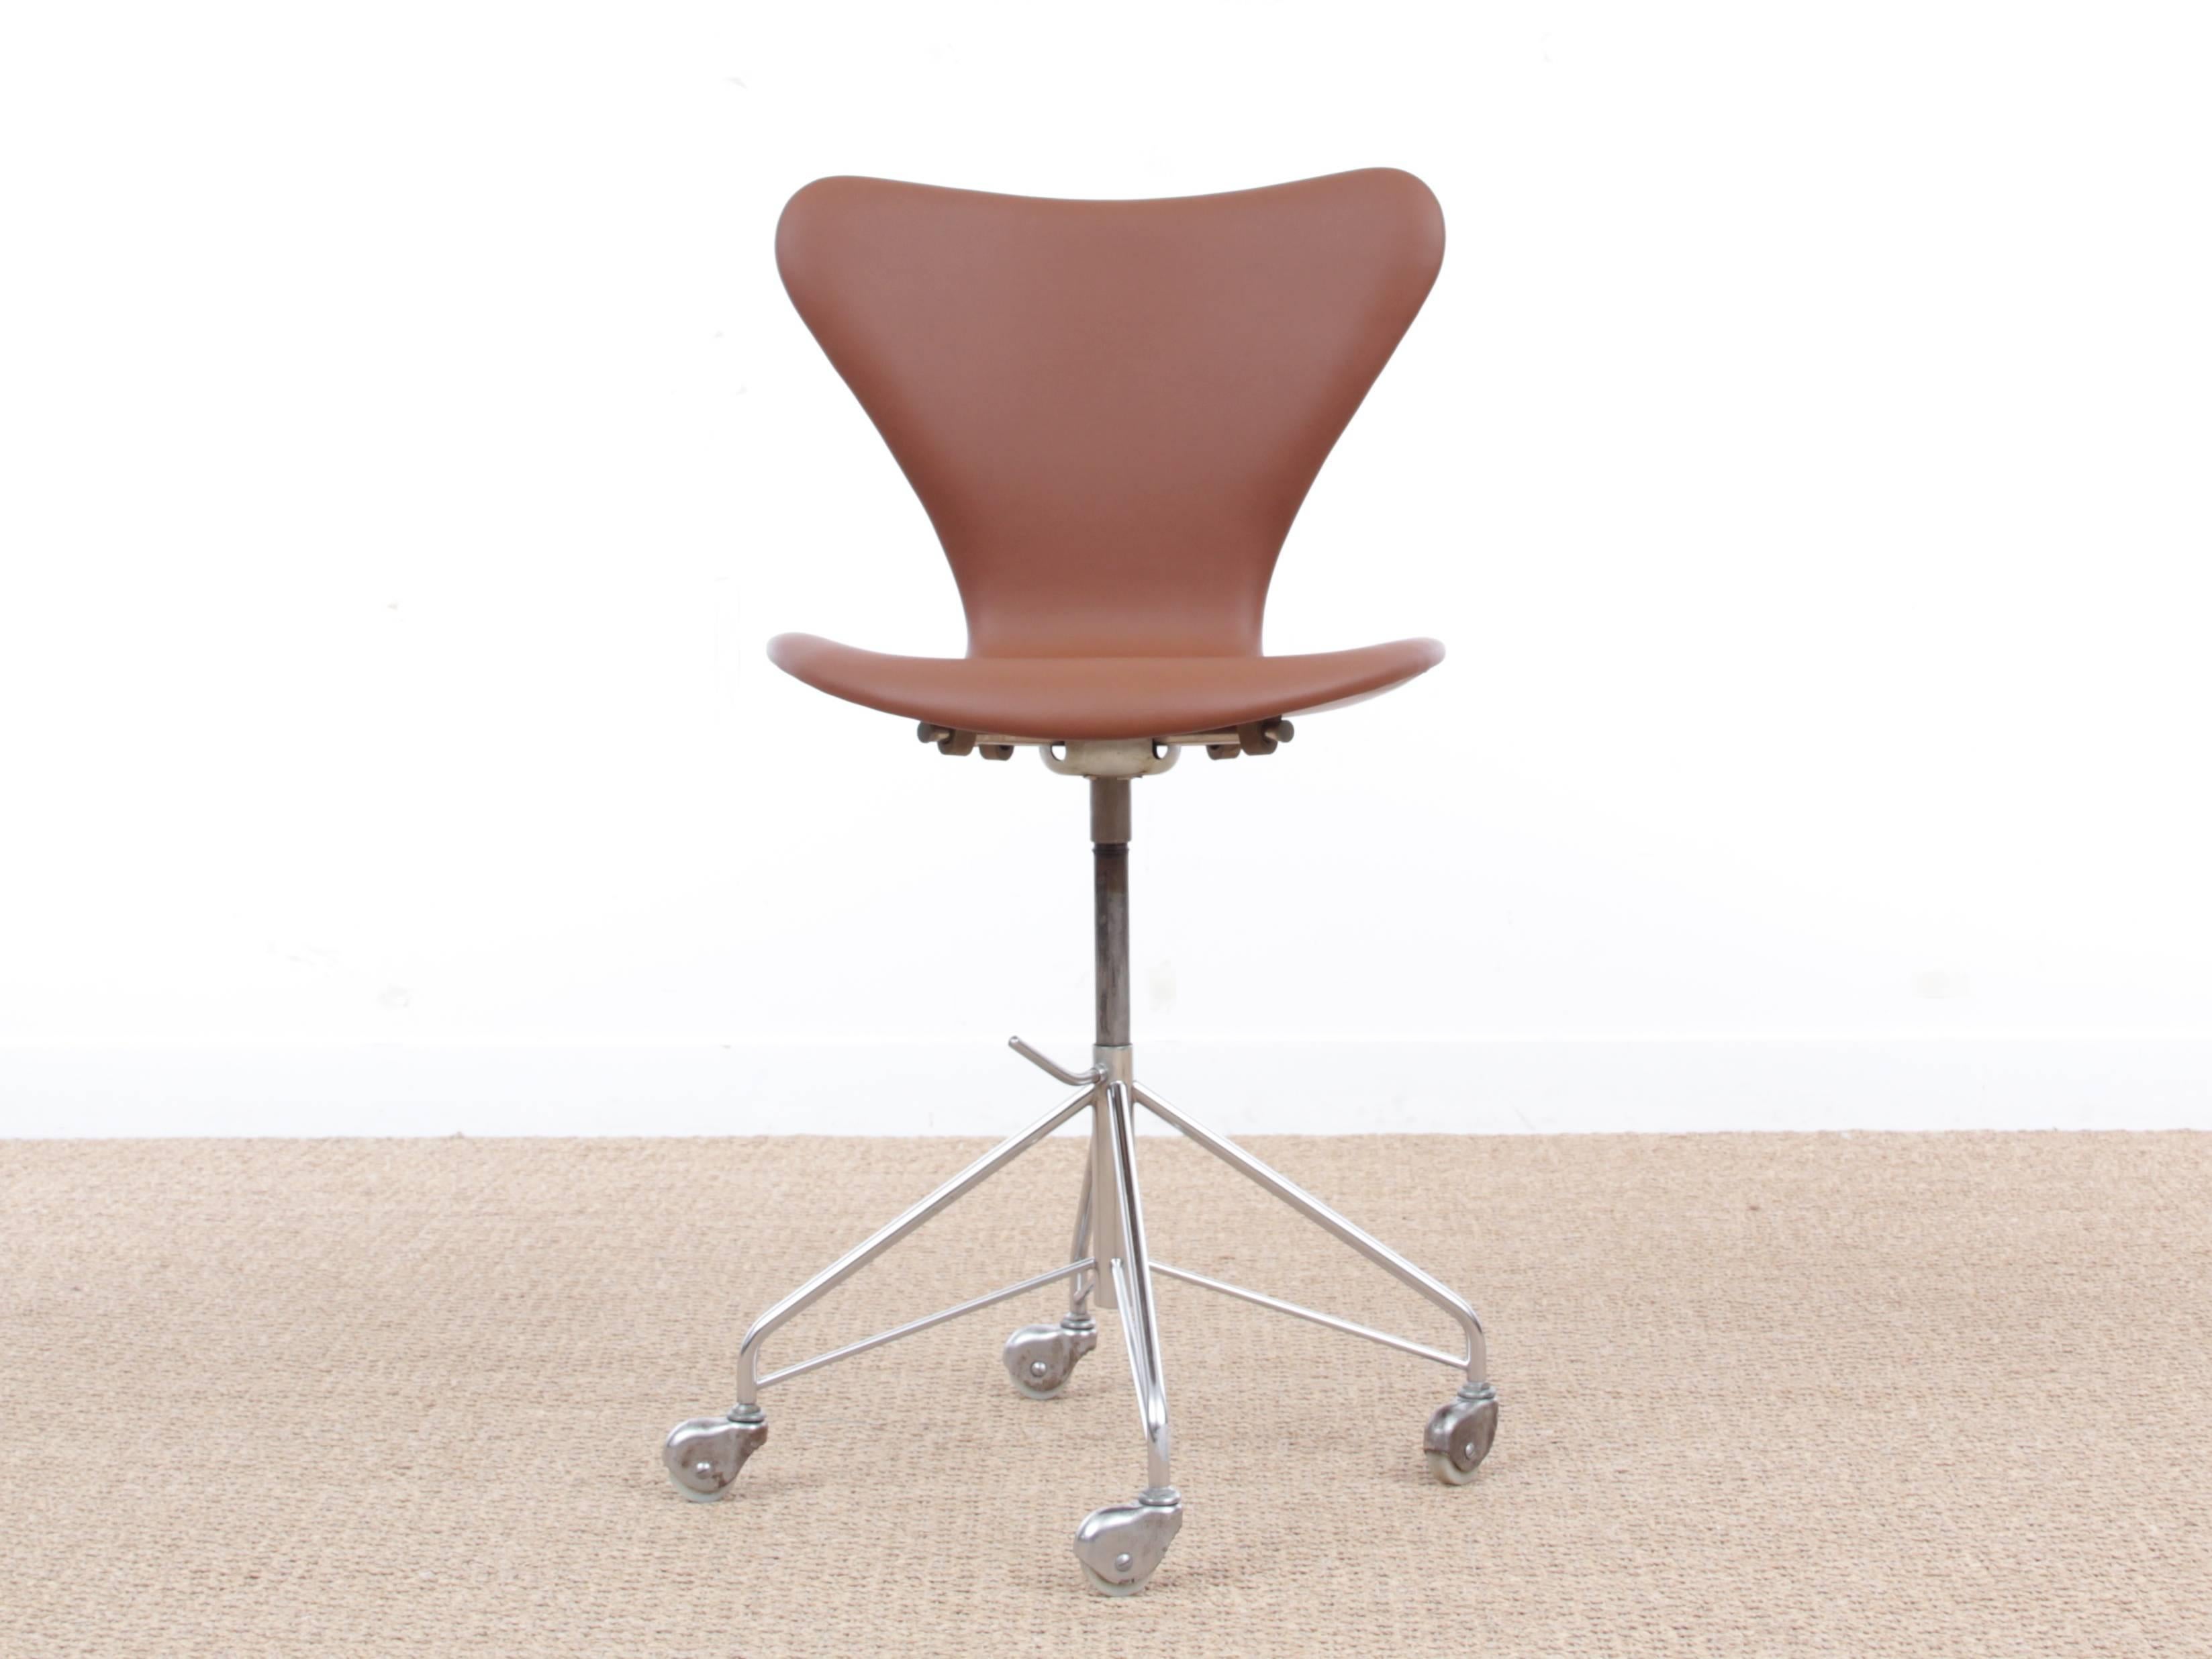 Mid-Century Modern Scandinavian leather desk chair model 3117 by Arne Jacobsen for Fritz Hansen. Edition from 1969. Newly reupholstered with Sorensen prestige cognac leather.